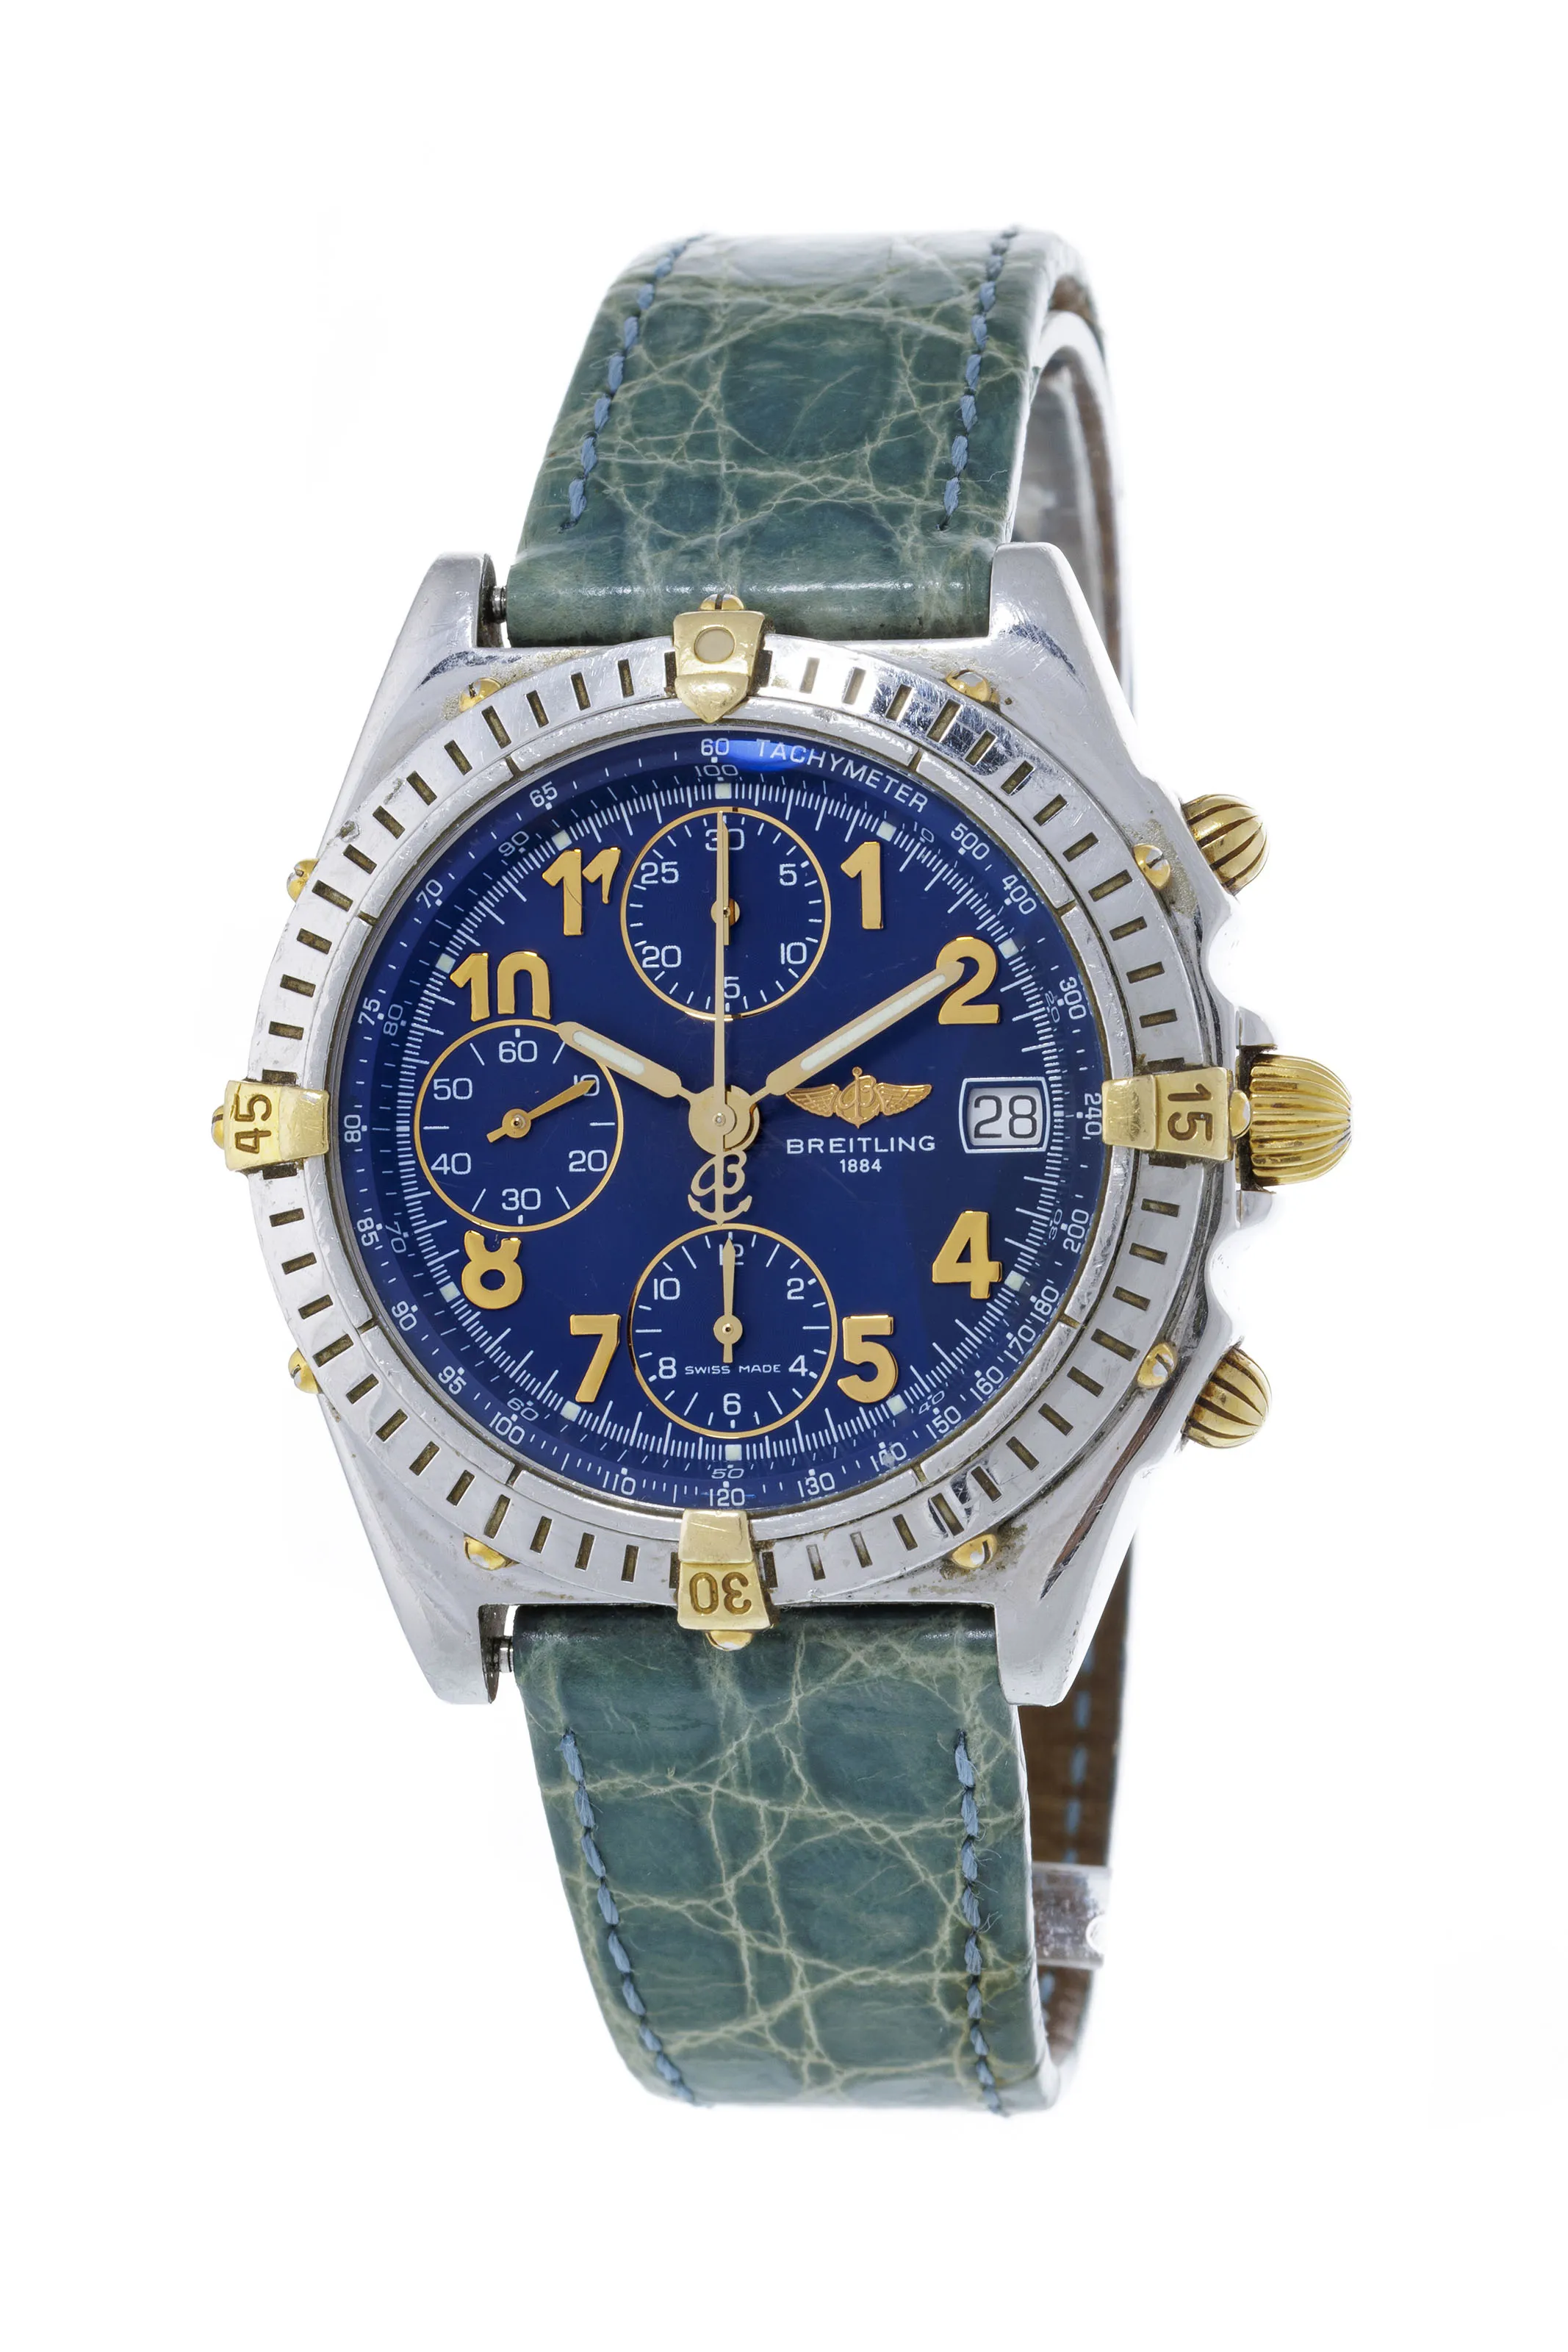 Breitling Chronomat B13050.1 40mm Stainless steel and yellow gold Blue